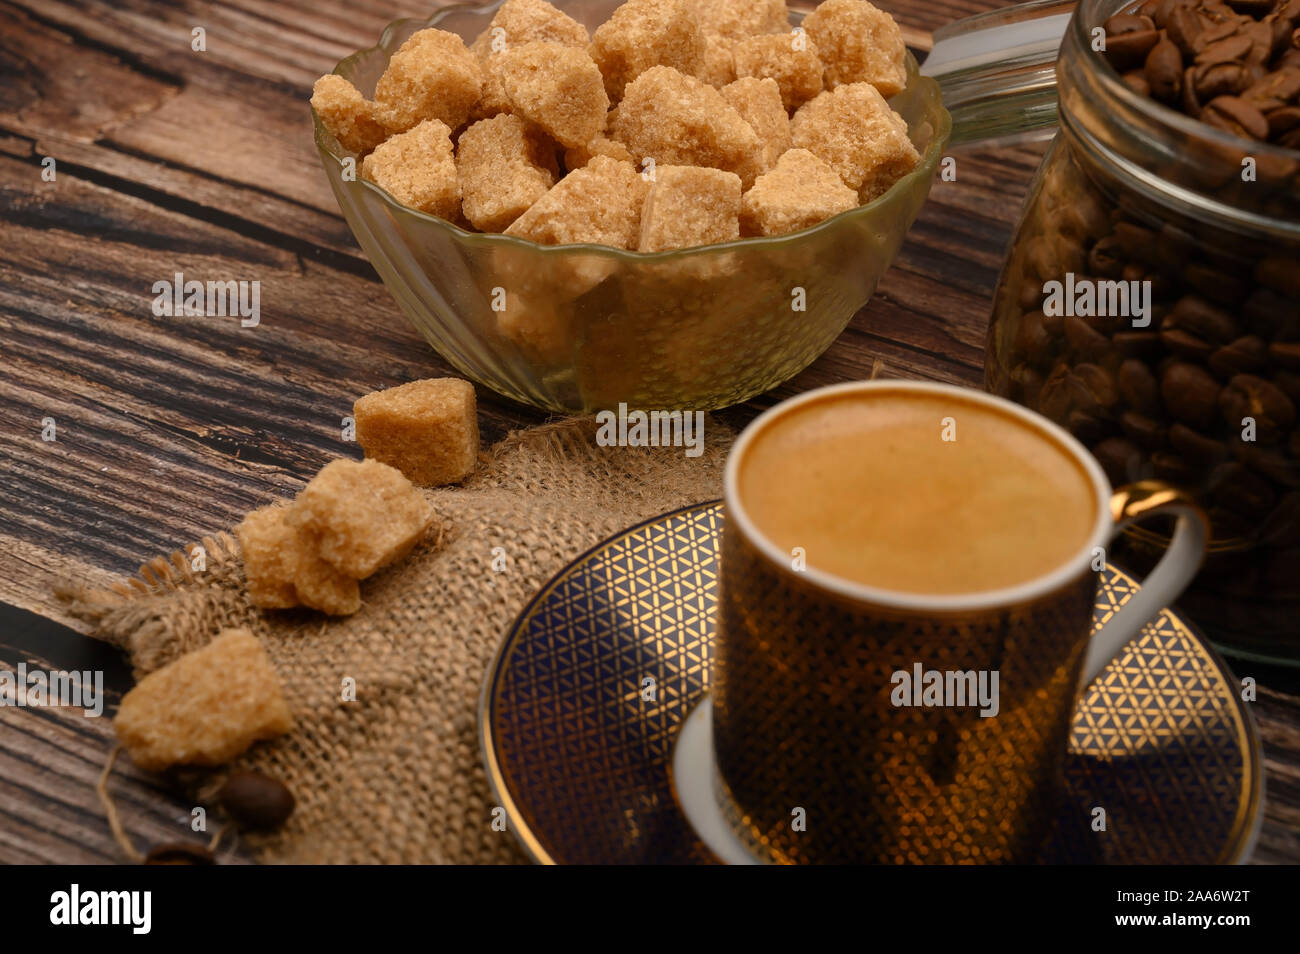 A Cup of coffee, pieces of brown sugar in a sugar bowl, coffee beans in a glass jar on a wooden background Stock Photo